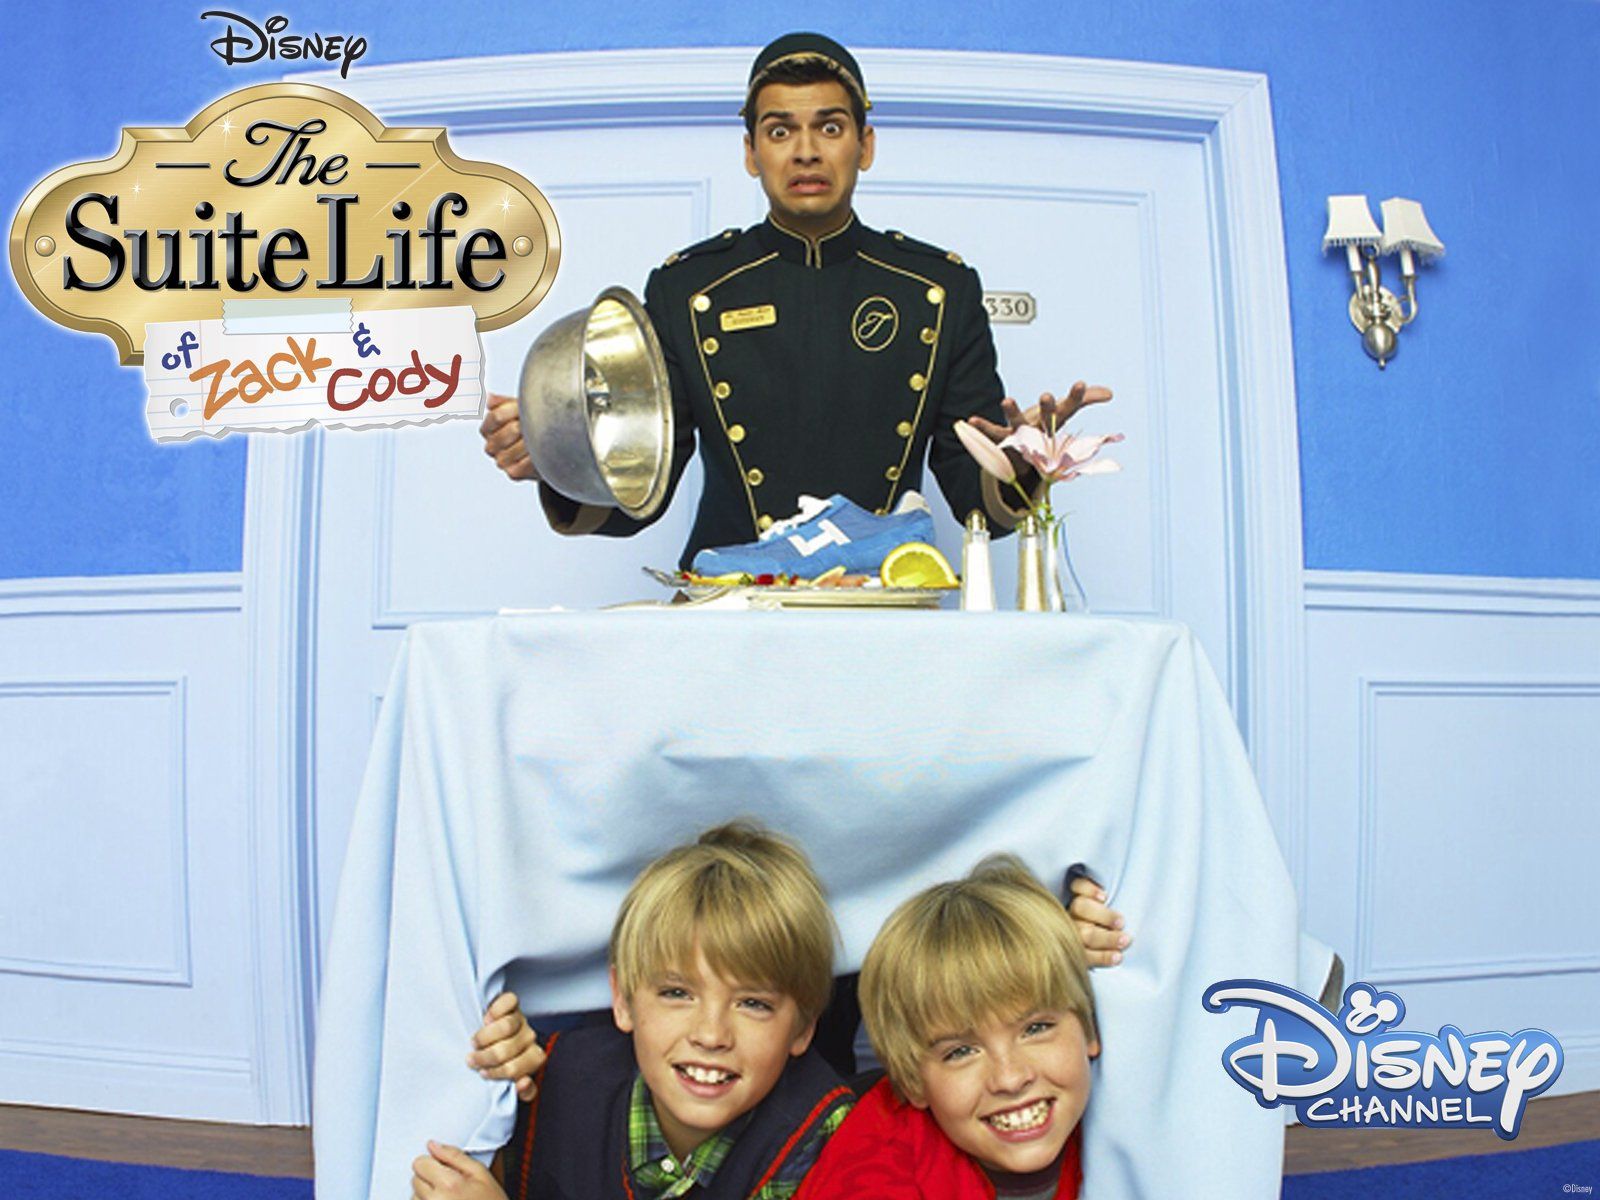 Watch The Suite Life of Zack & Cody Volume 2